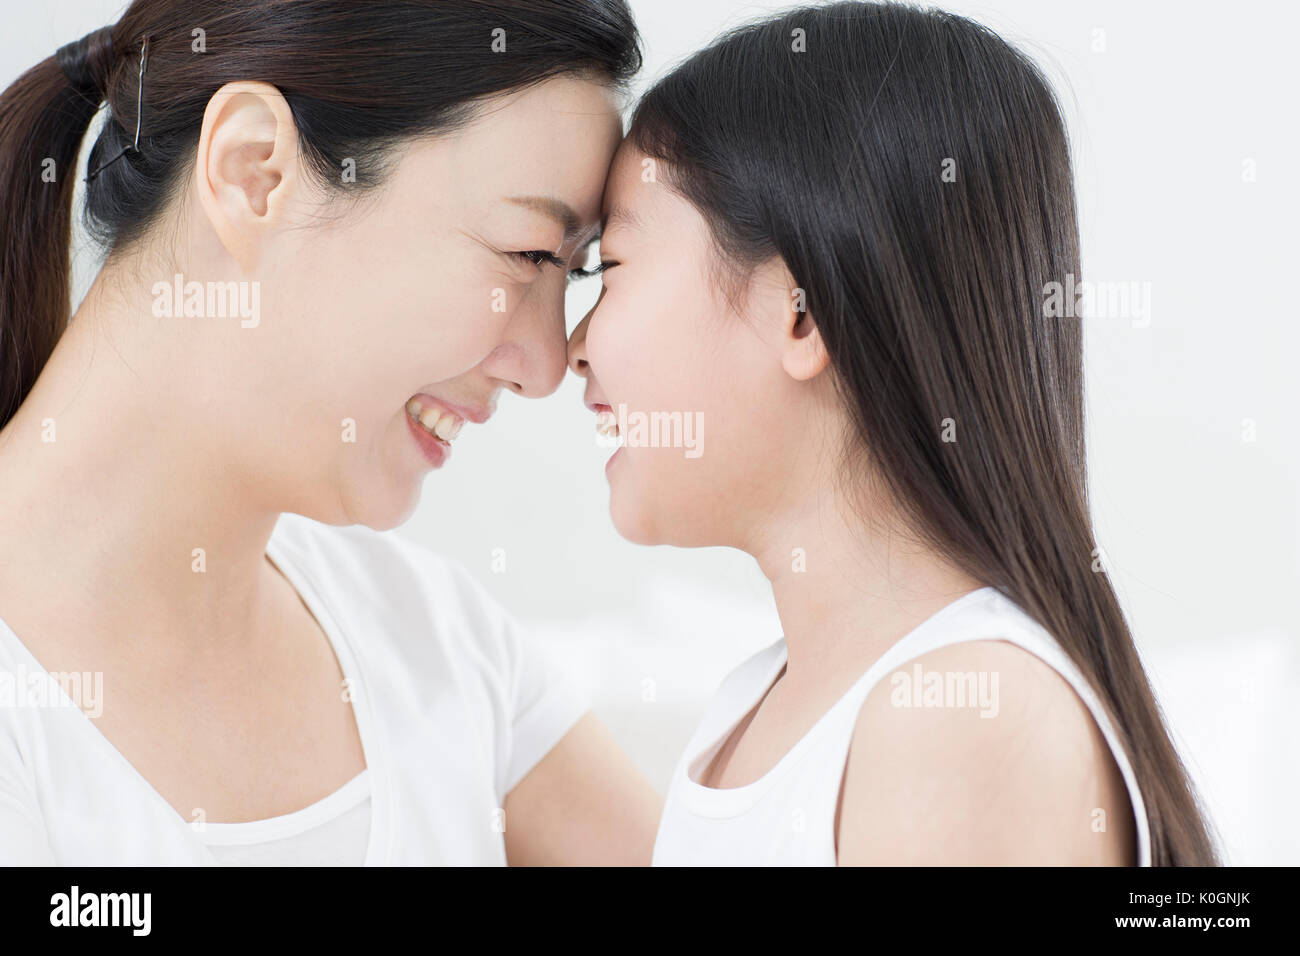 Side view portrait of smiling mother and daughter face to face Stock Photo